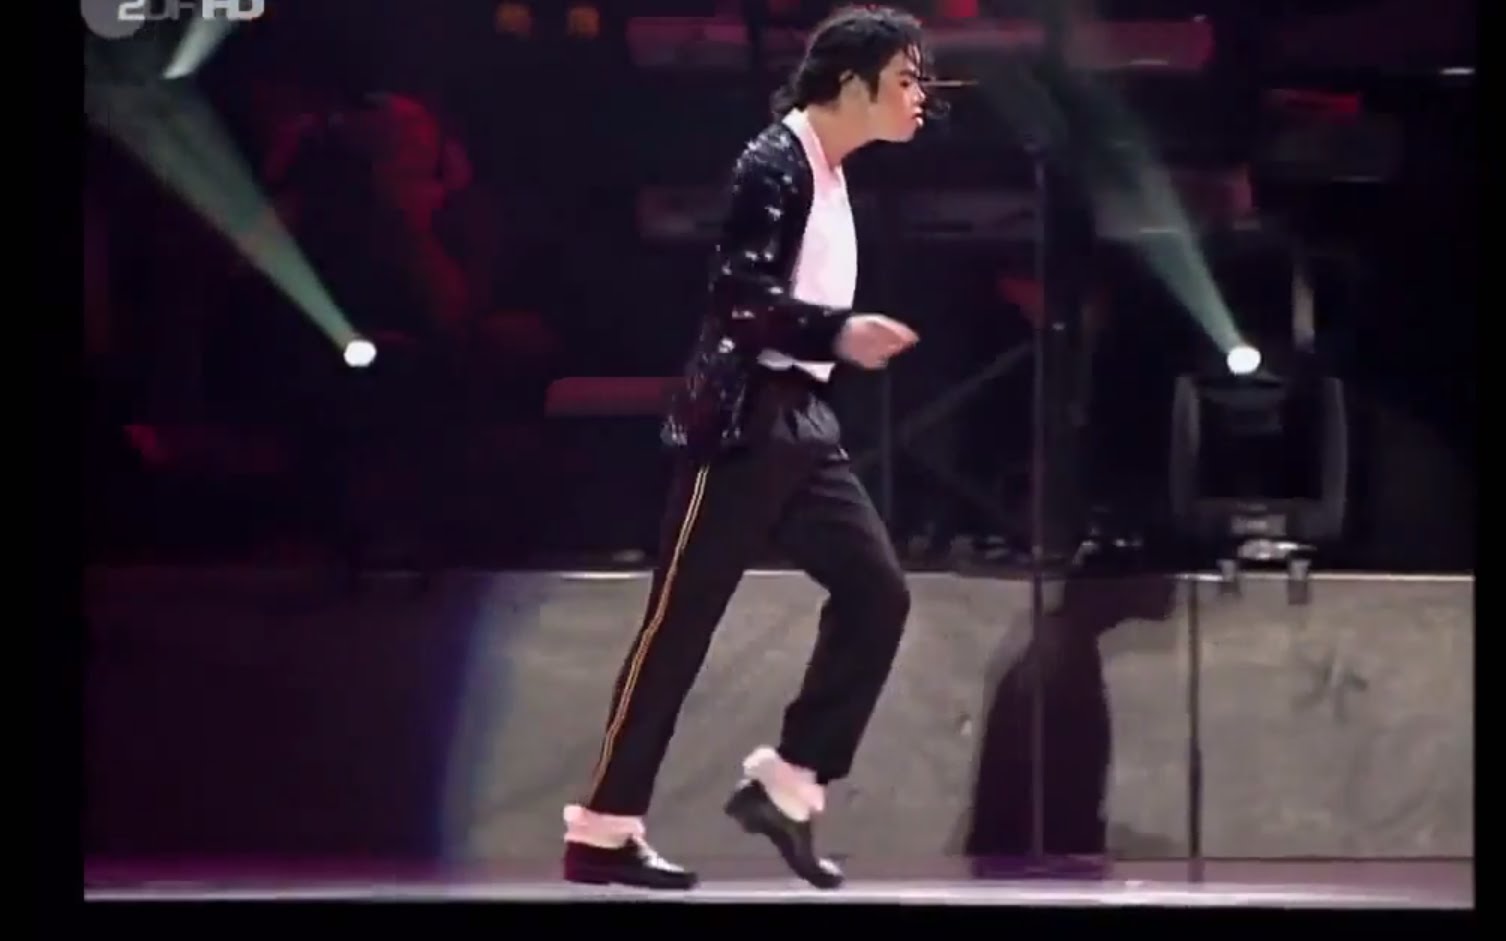 Michael Jackson's Moonwalk Shoes Are Up for Auction for $10K